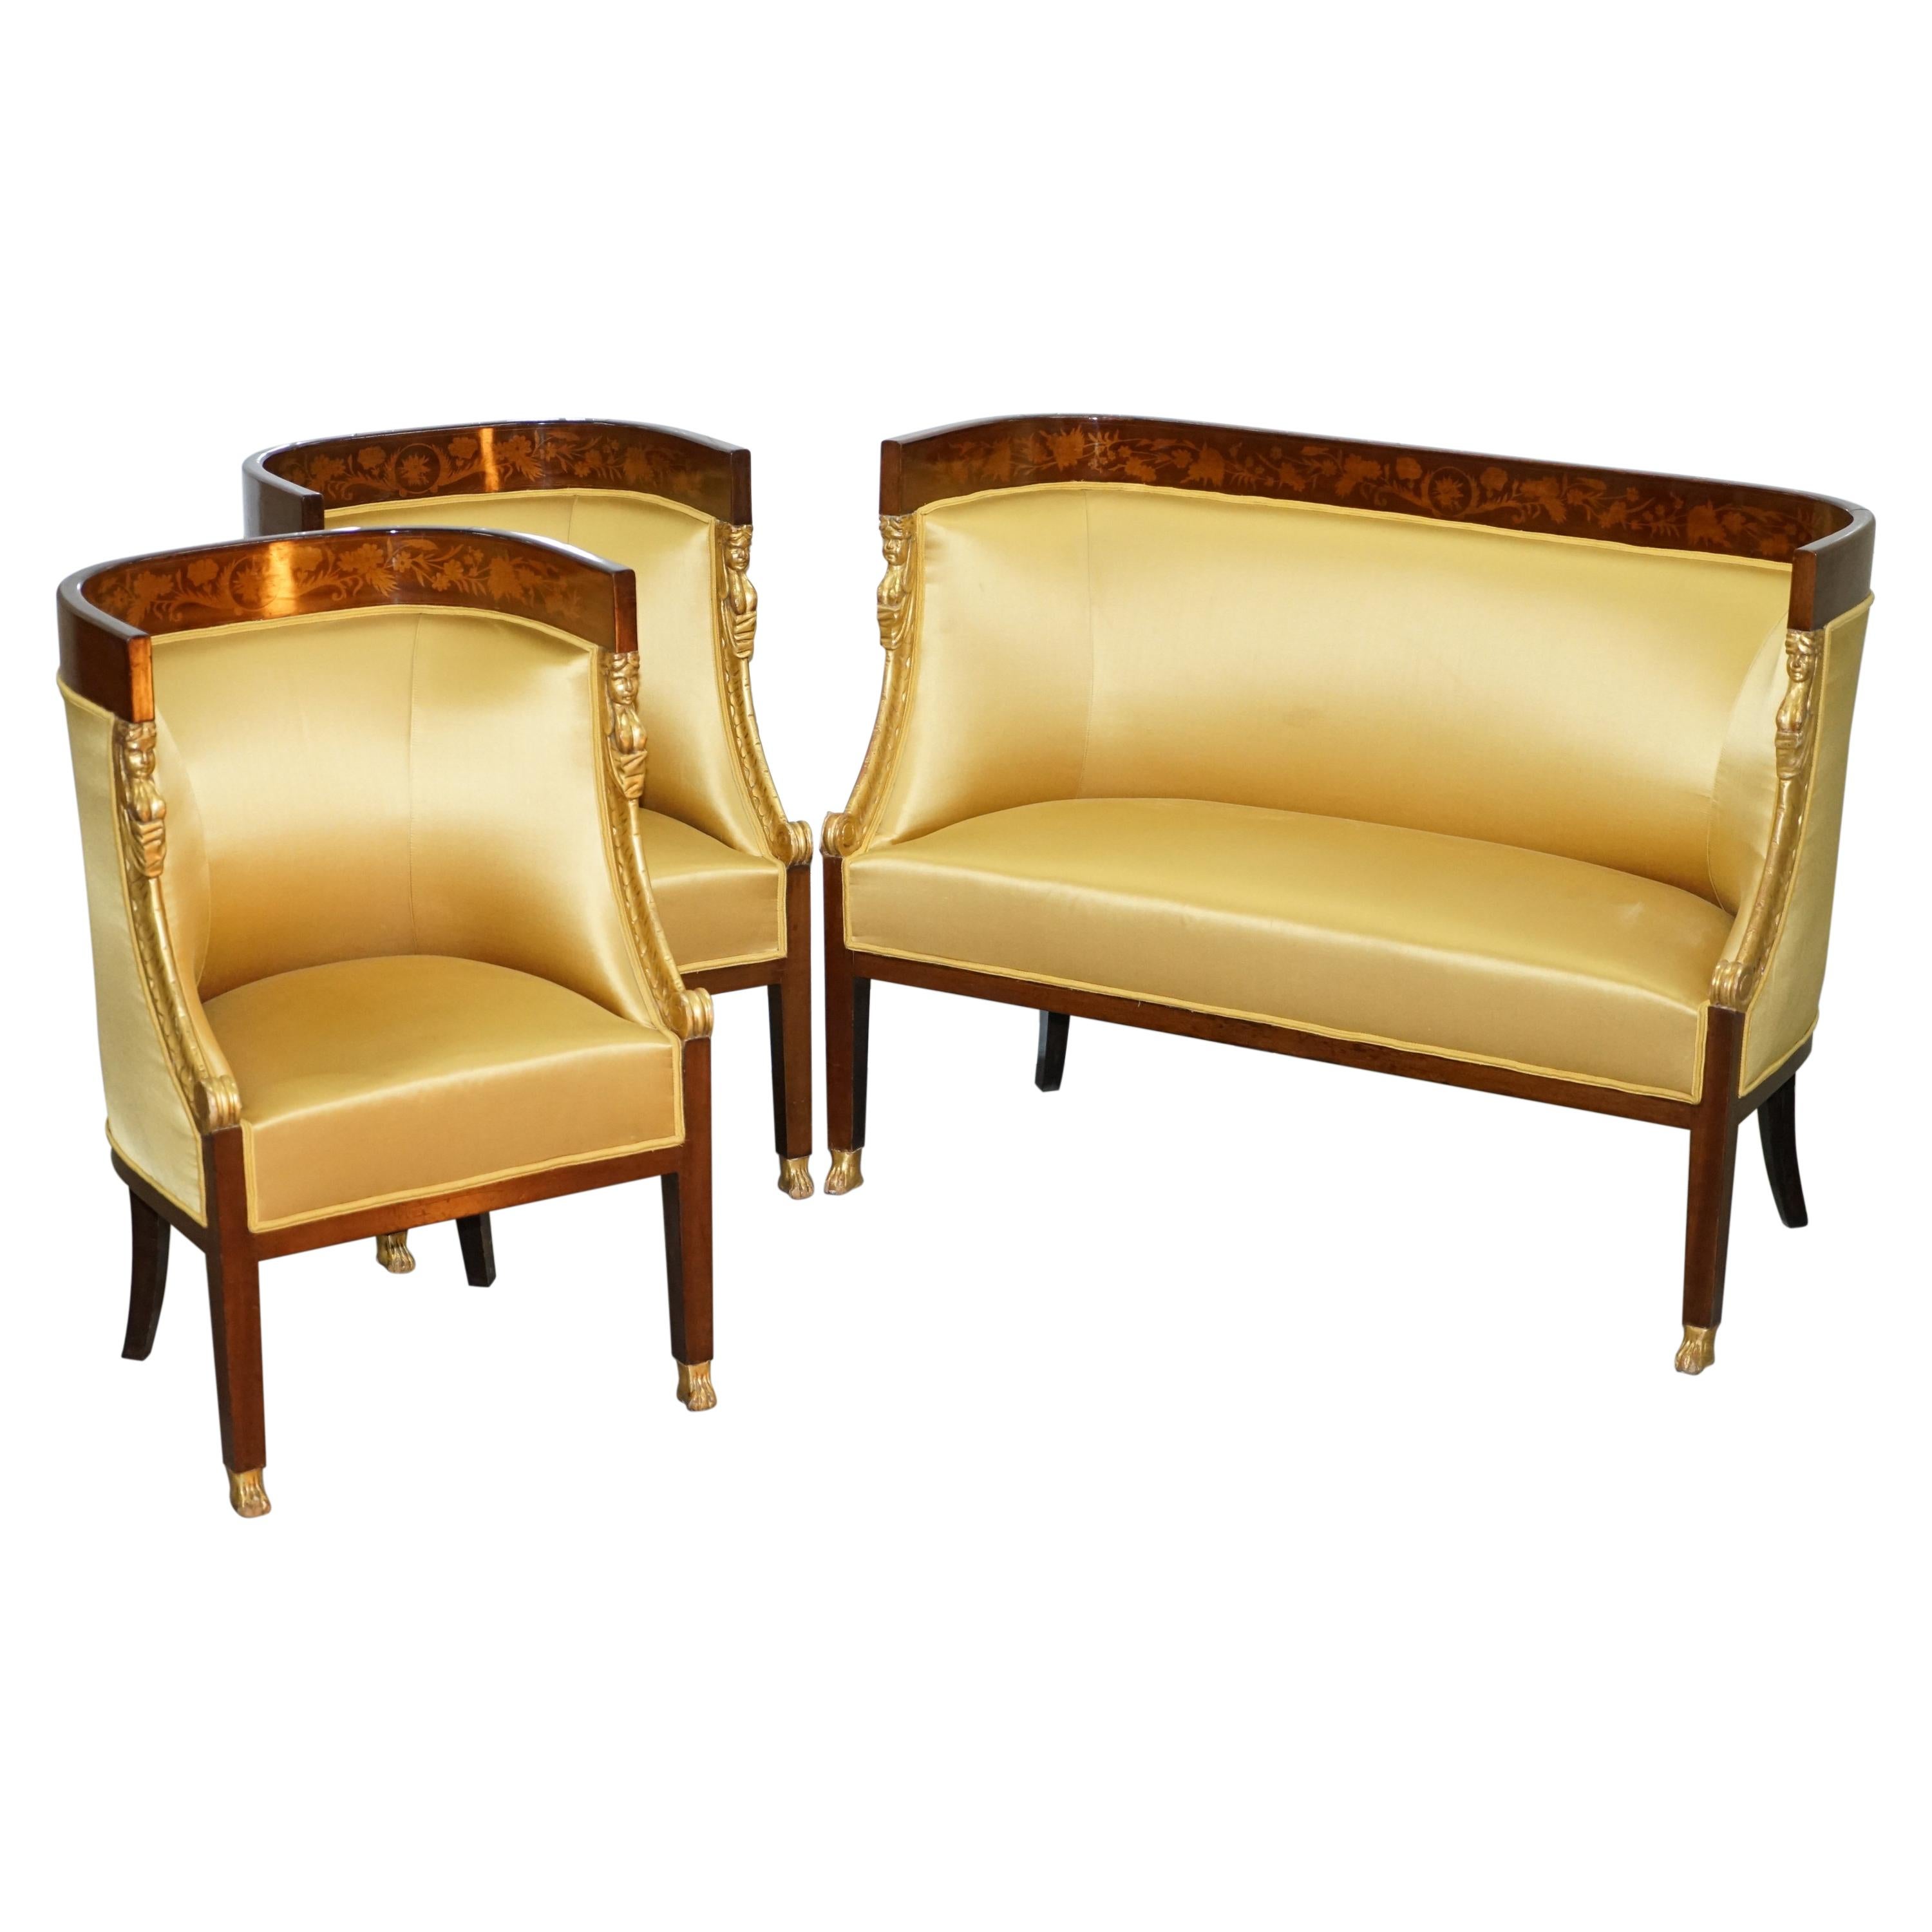 1870 French Empire Marquetry Inlaid Suite Berger Armchairs & Settee Canape, Pair For Sale